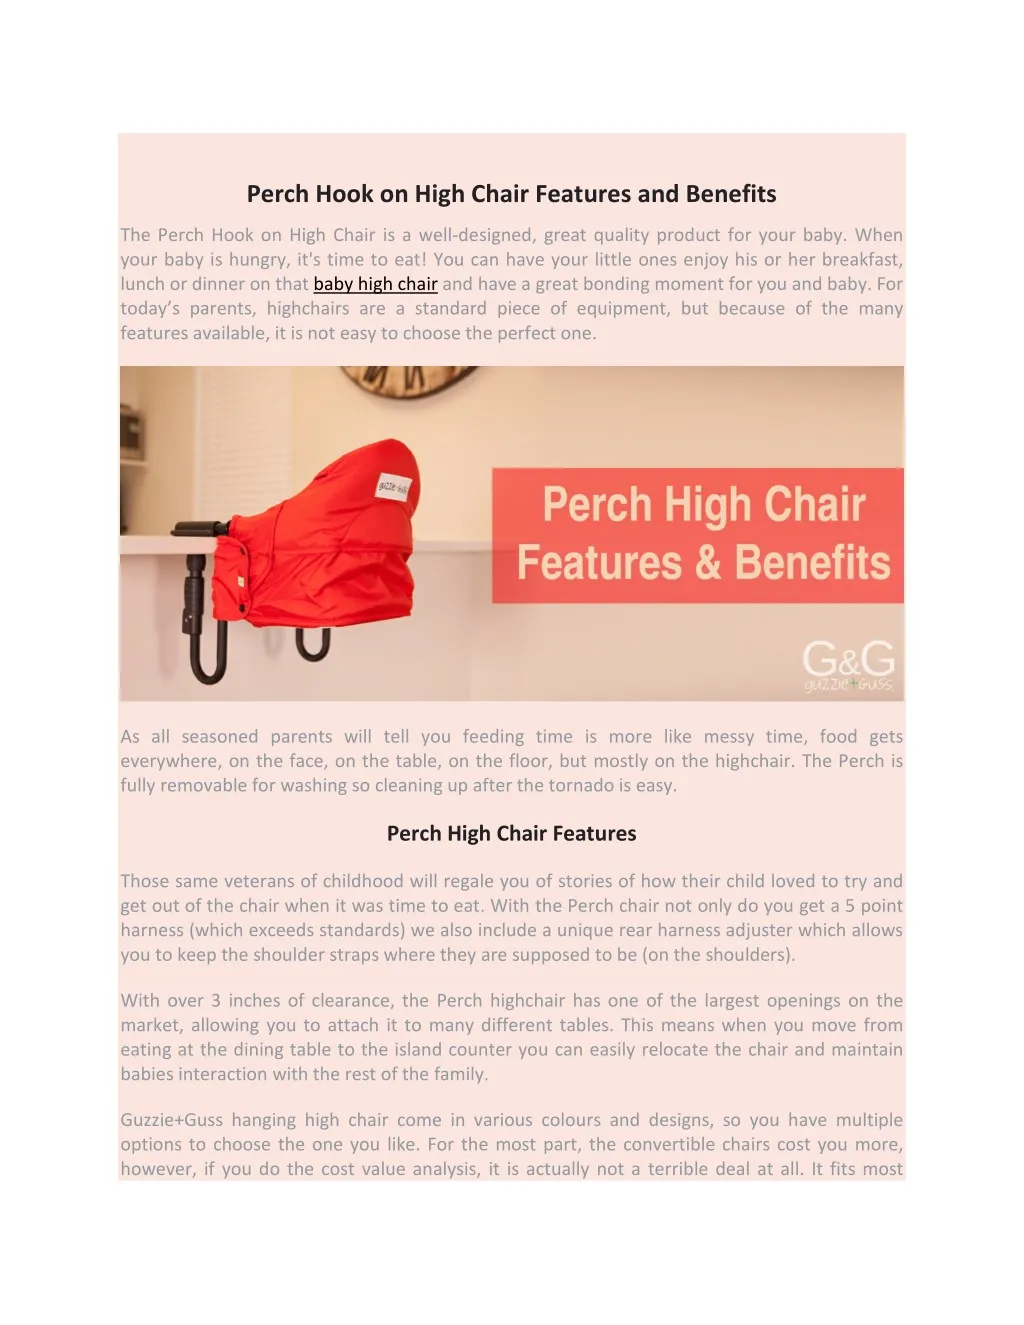 Ppt Perch Hook On High Chair Features And Benefits Powerpoint